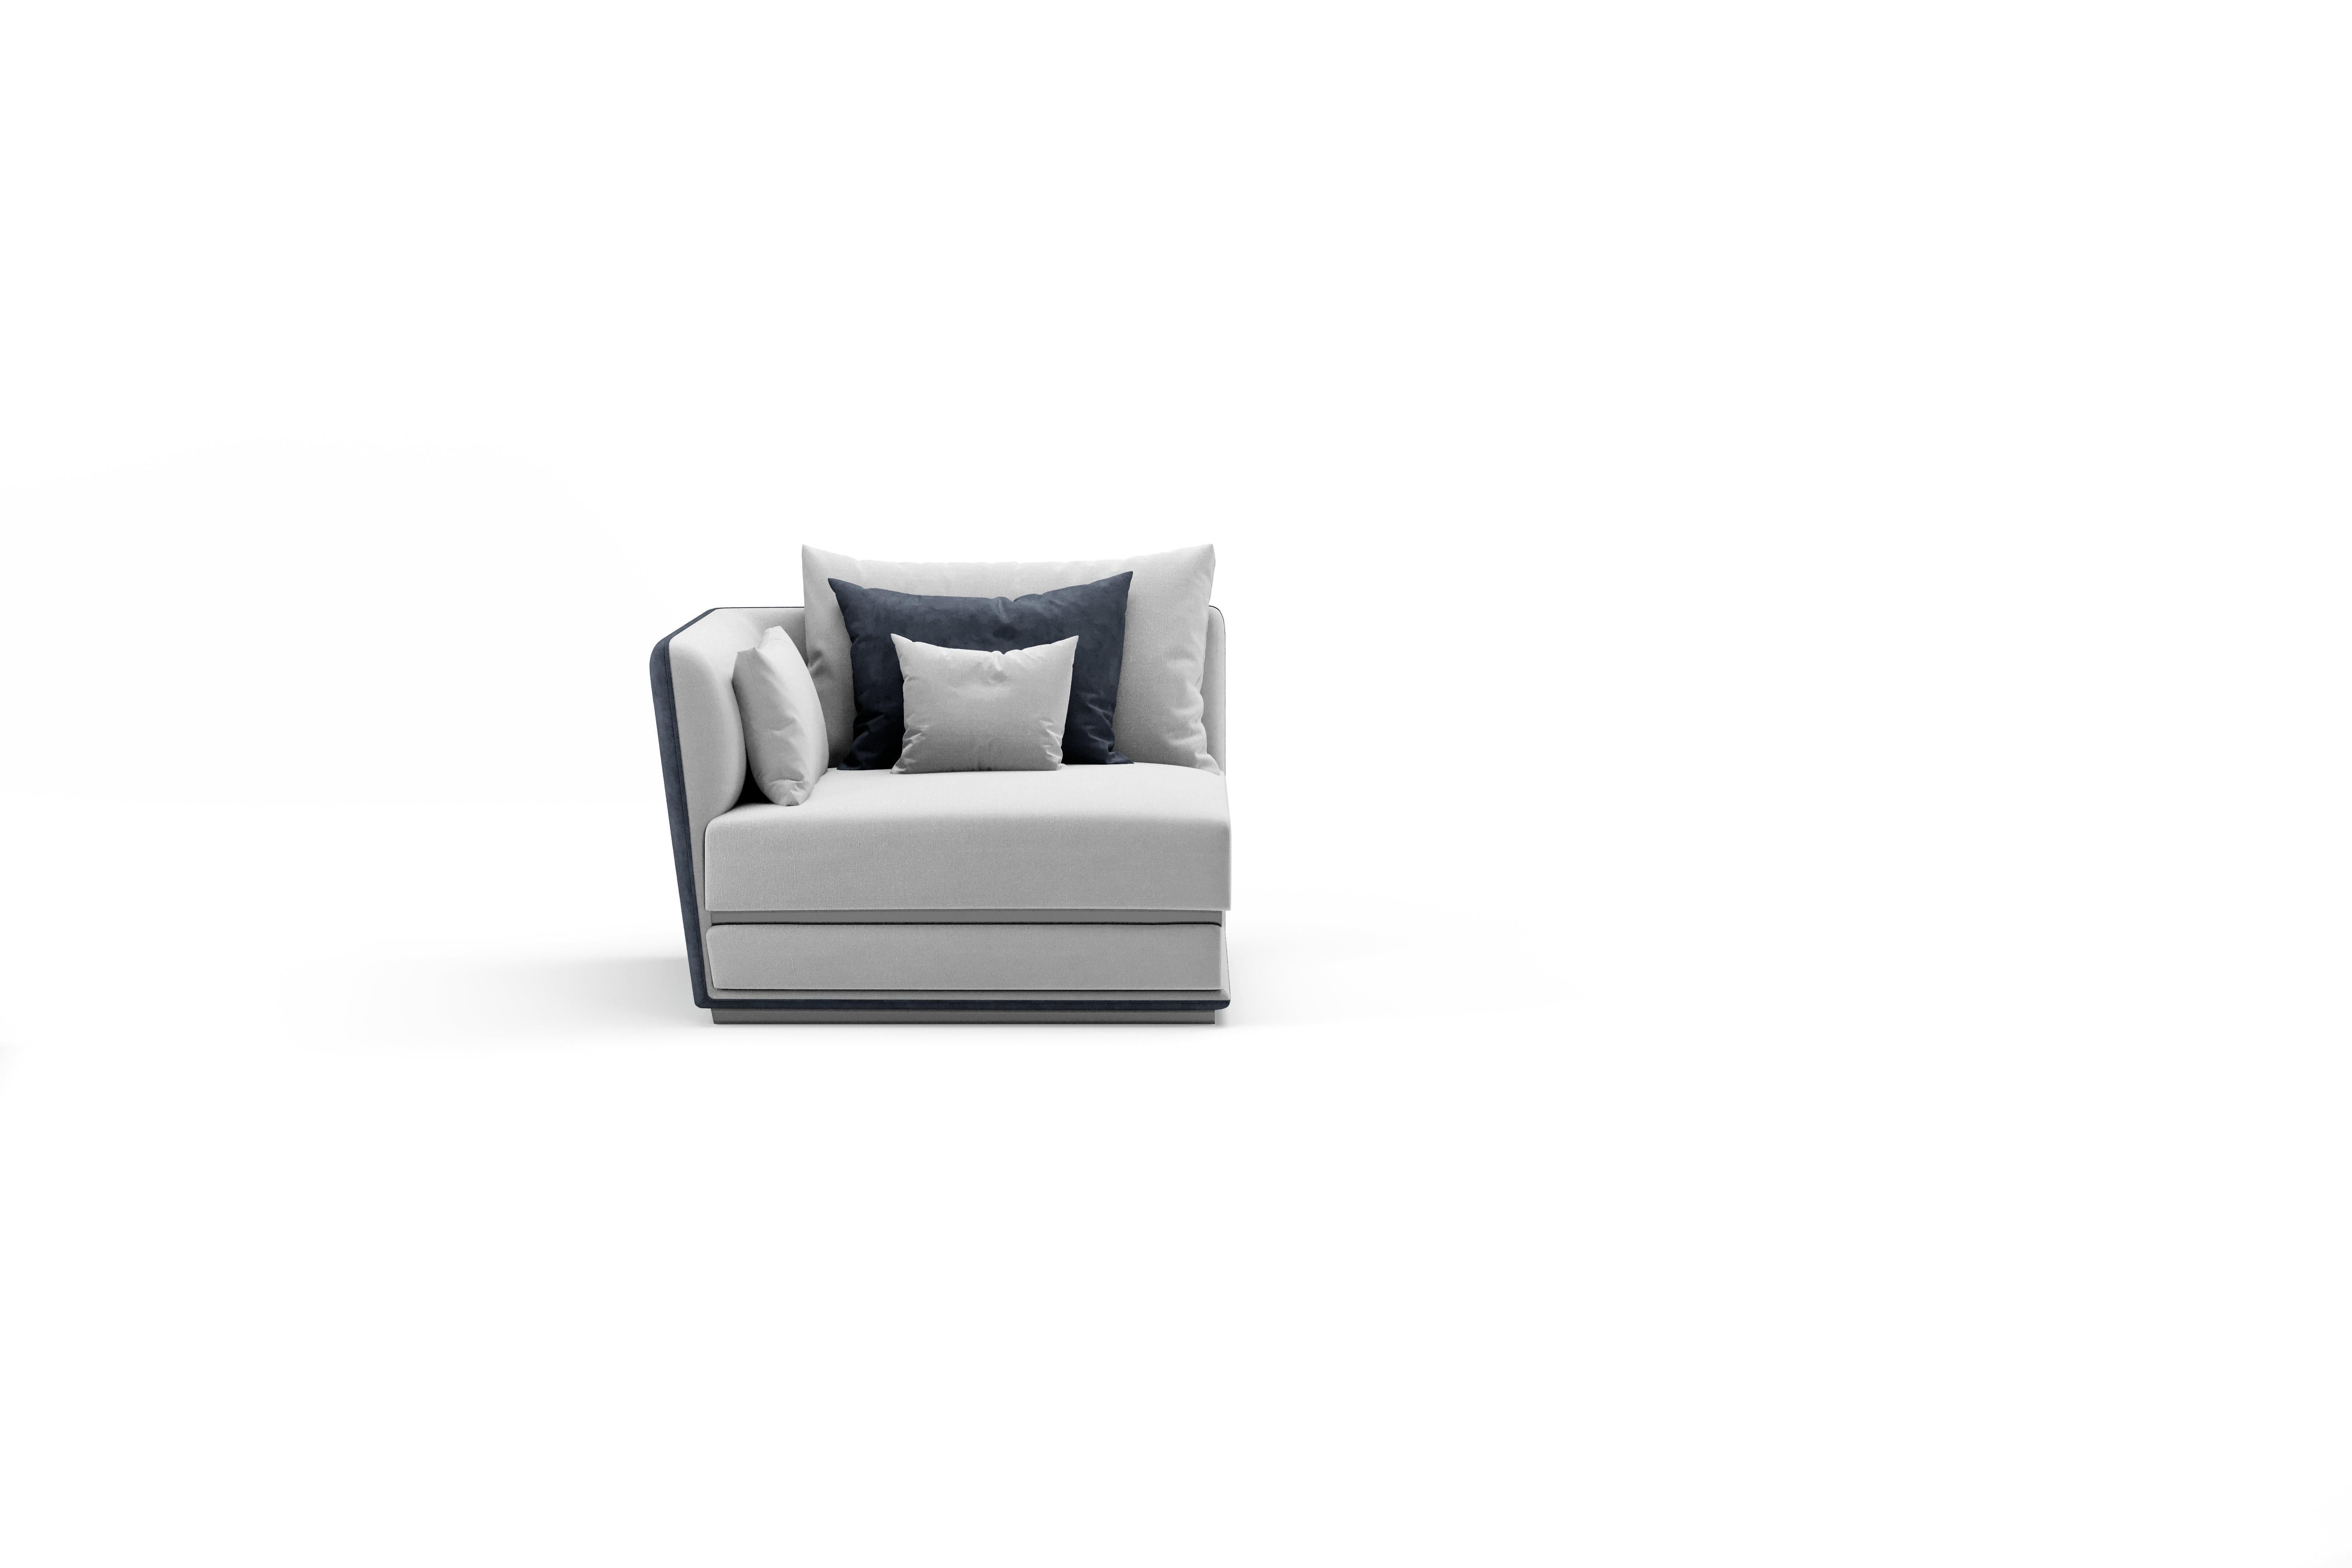 Prisma right/left arm Single element is an element of modular sofa available in many colors and materials. Its structure is wood padded with multi-density rubber and interwoven elastic straps.
The base has titanium nickel finishing.

Prisma is